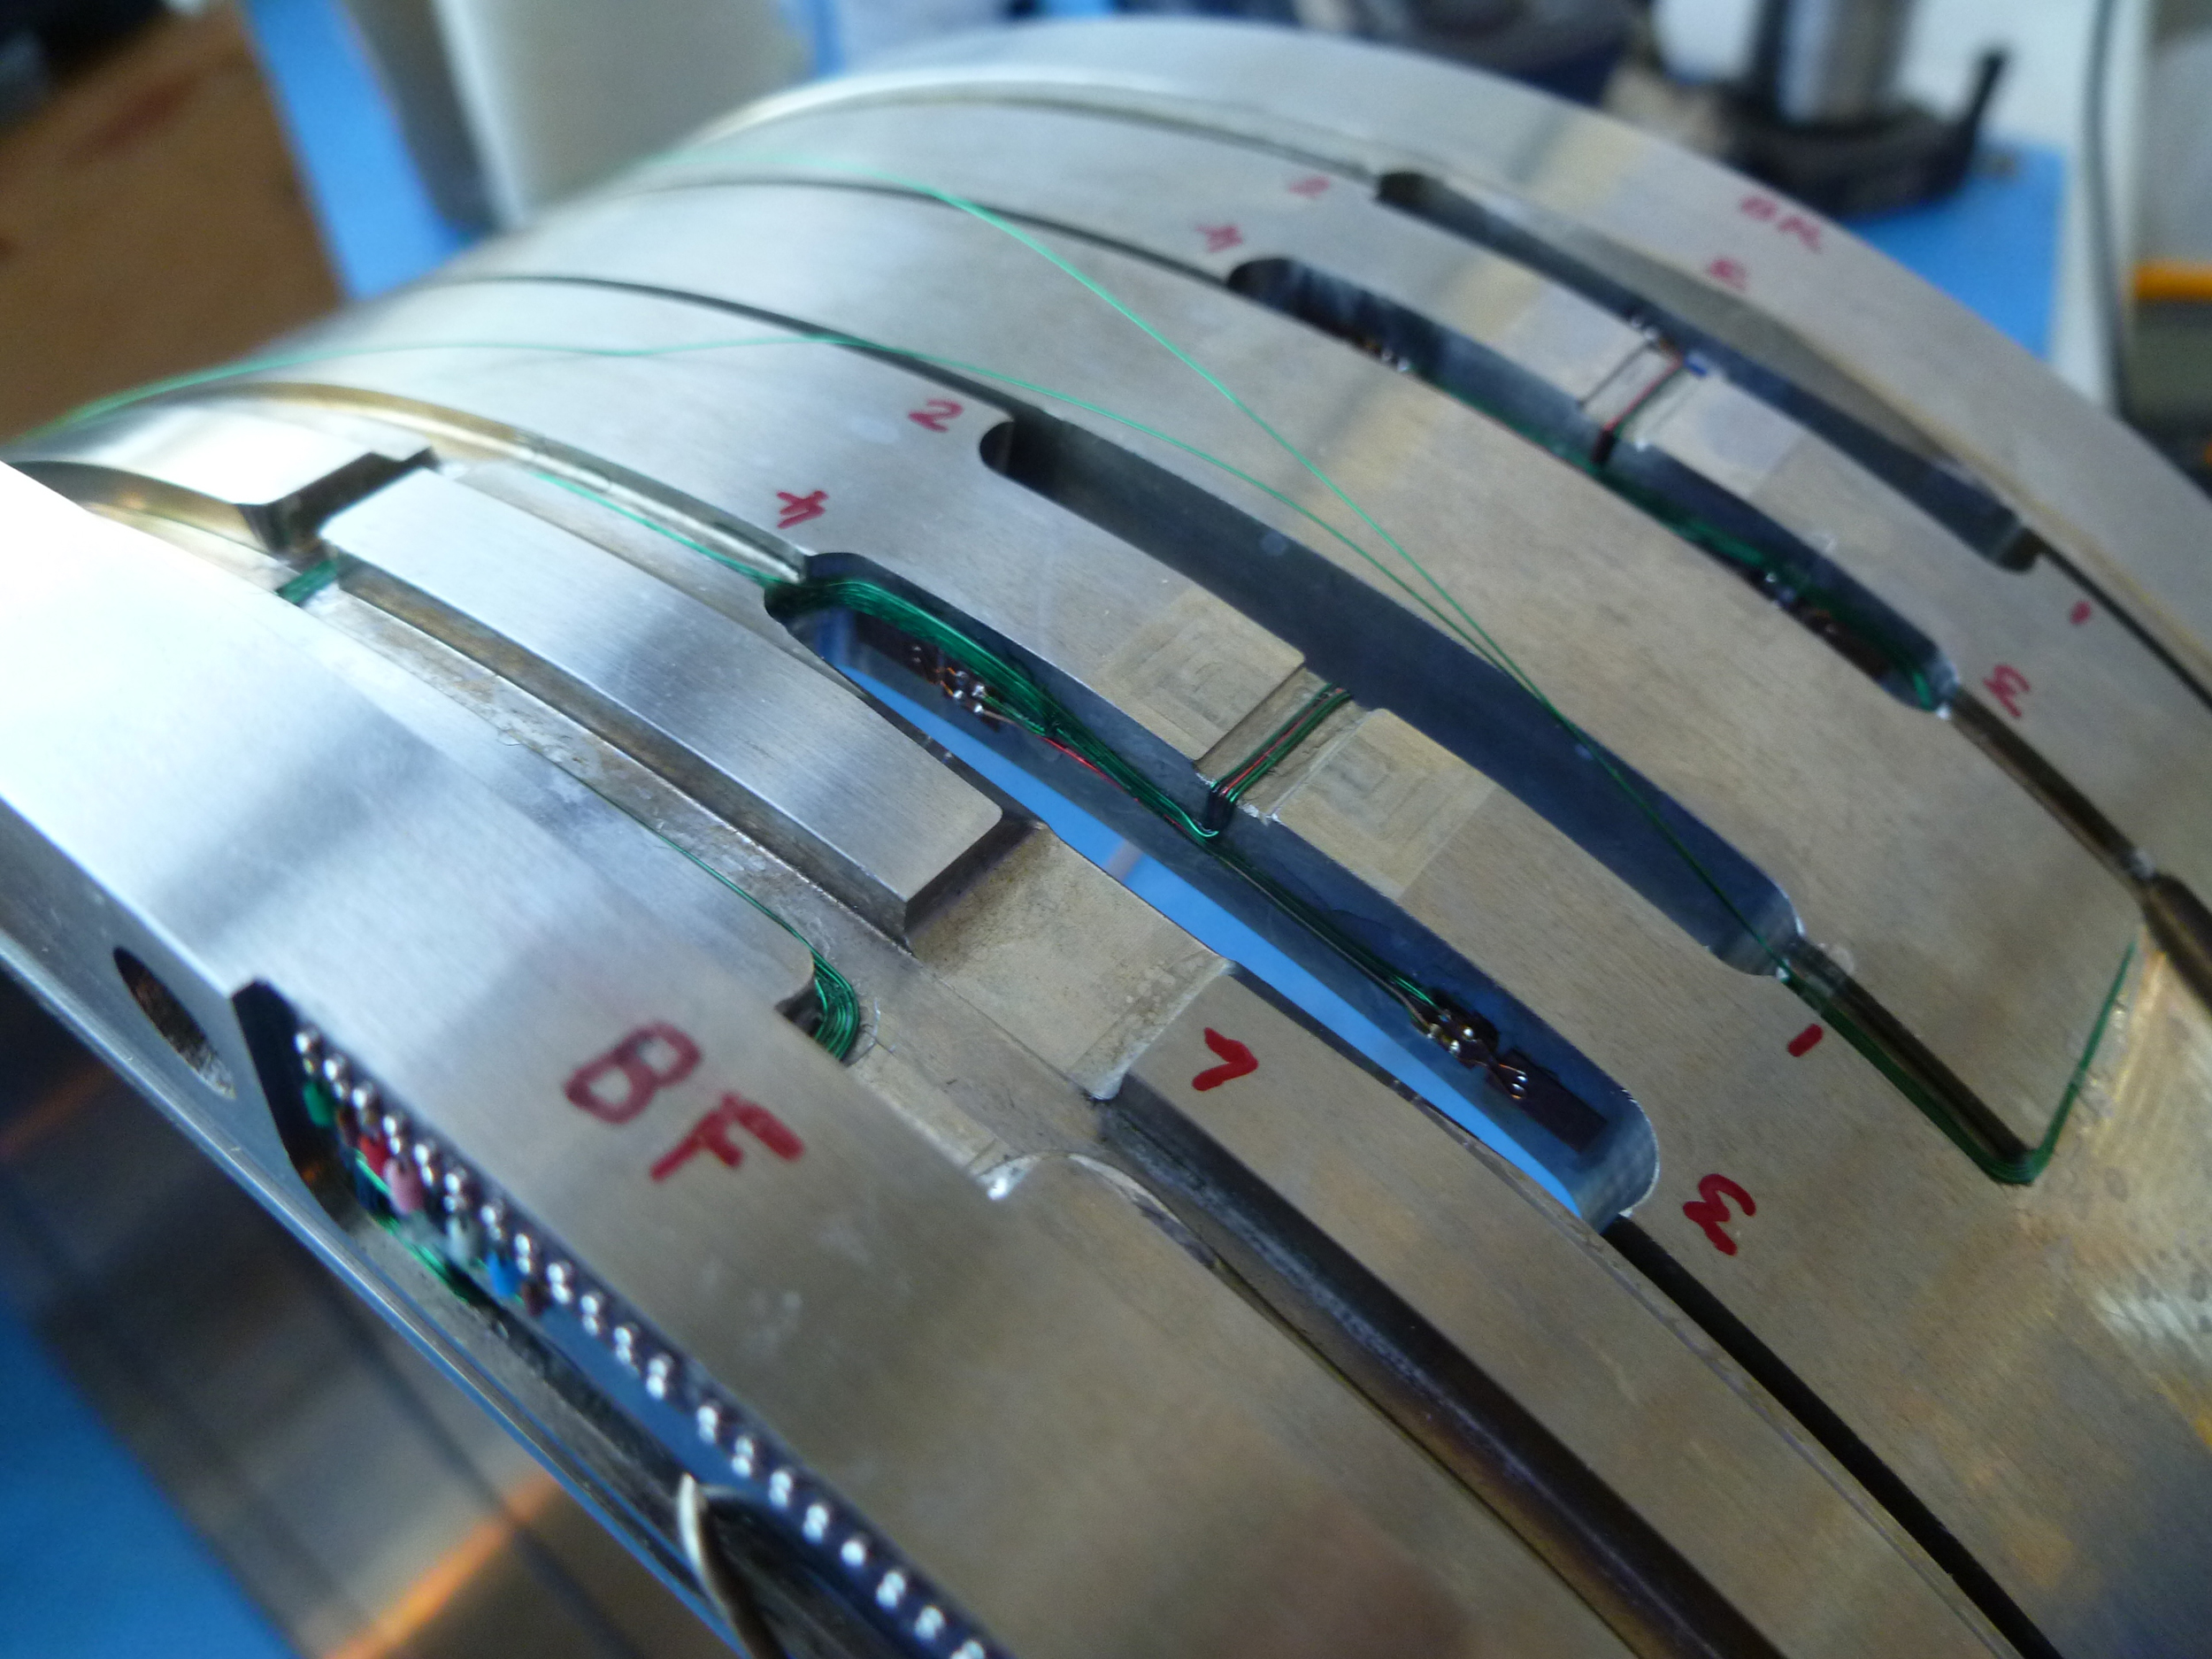 Bespoke wind tunnel balance. Complex cylindrical shell structure with flexures created with machined slots. Strain gauges, wiring and connection tag boards shown in the process of being installed.